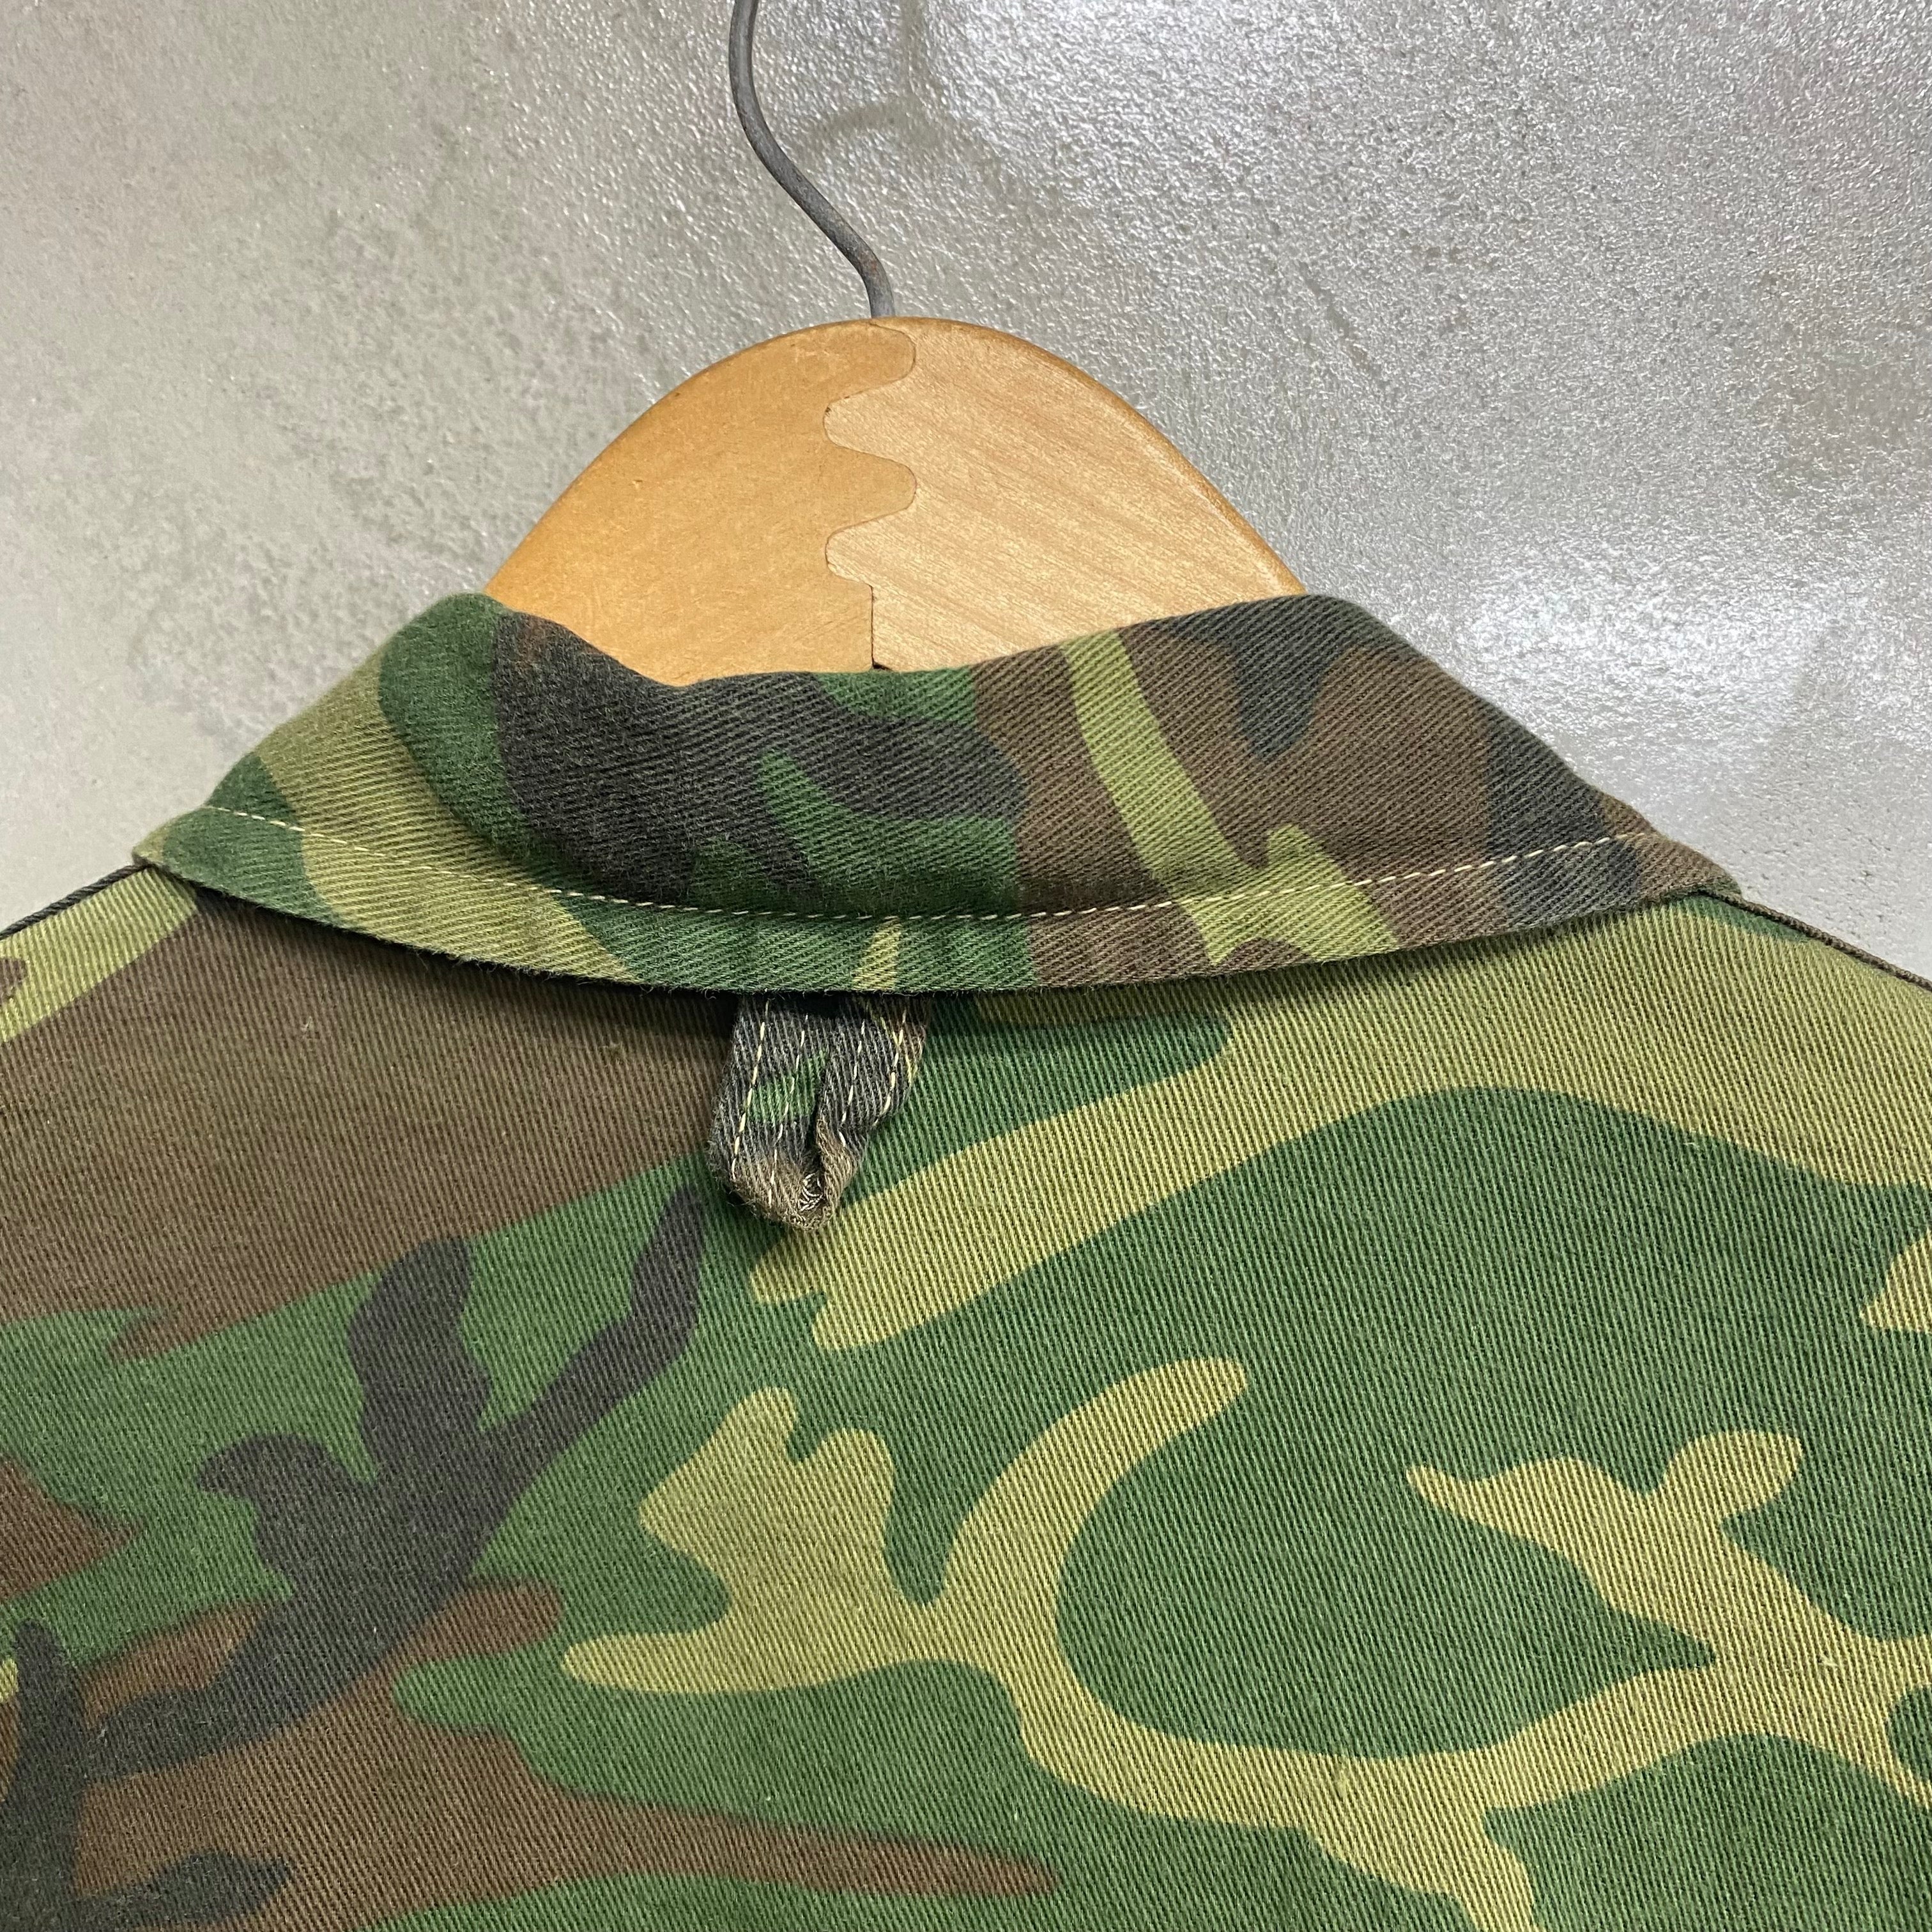 [ ONLY ONE ! ] TEXSPORT 70's - 80's CAMOUFLAGE JACKET / Mr.Clean Select